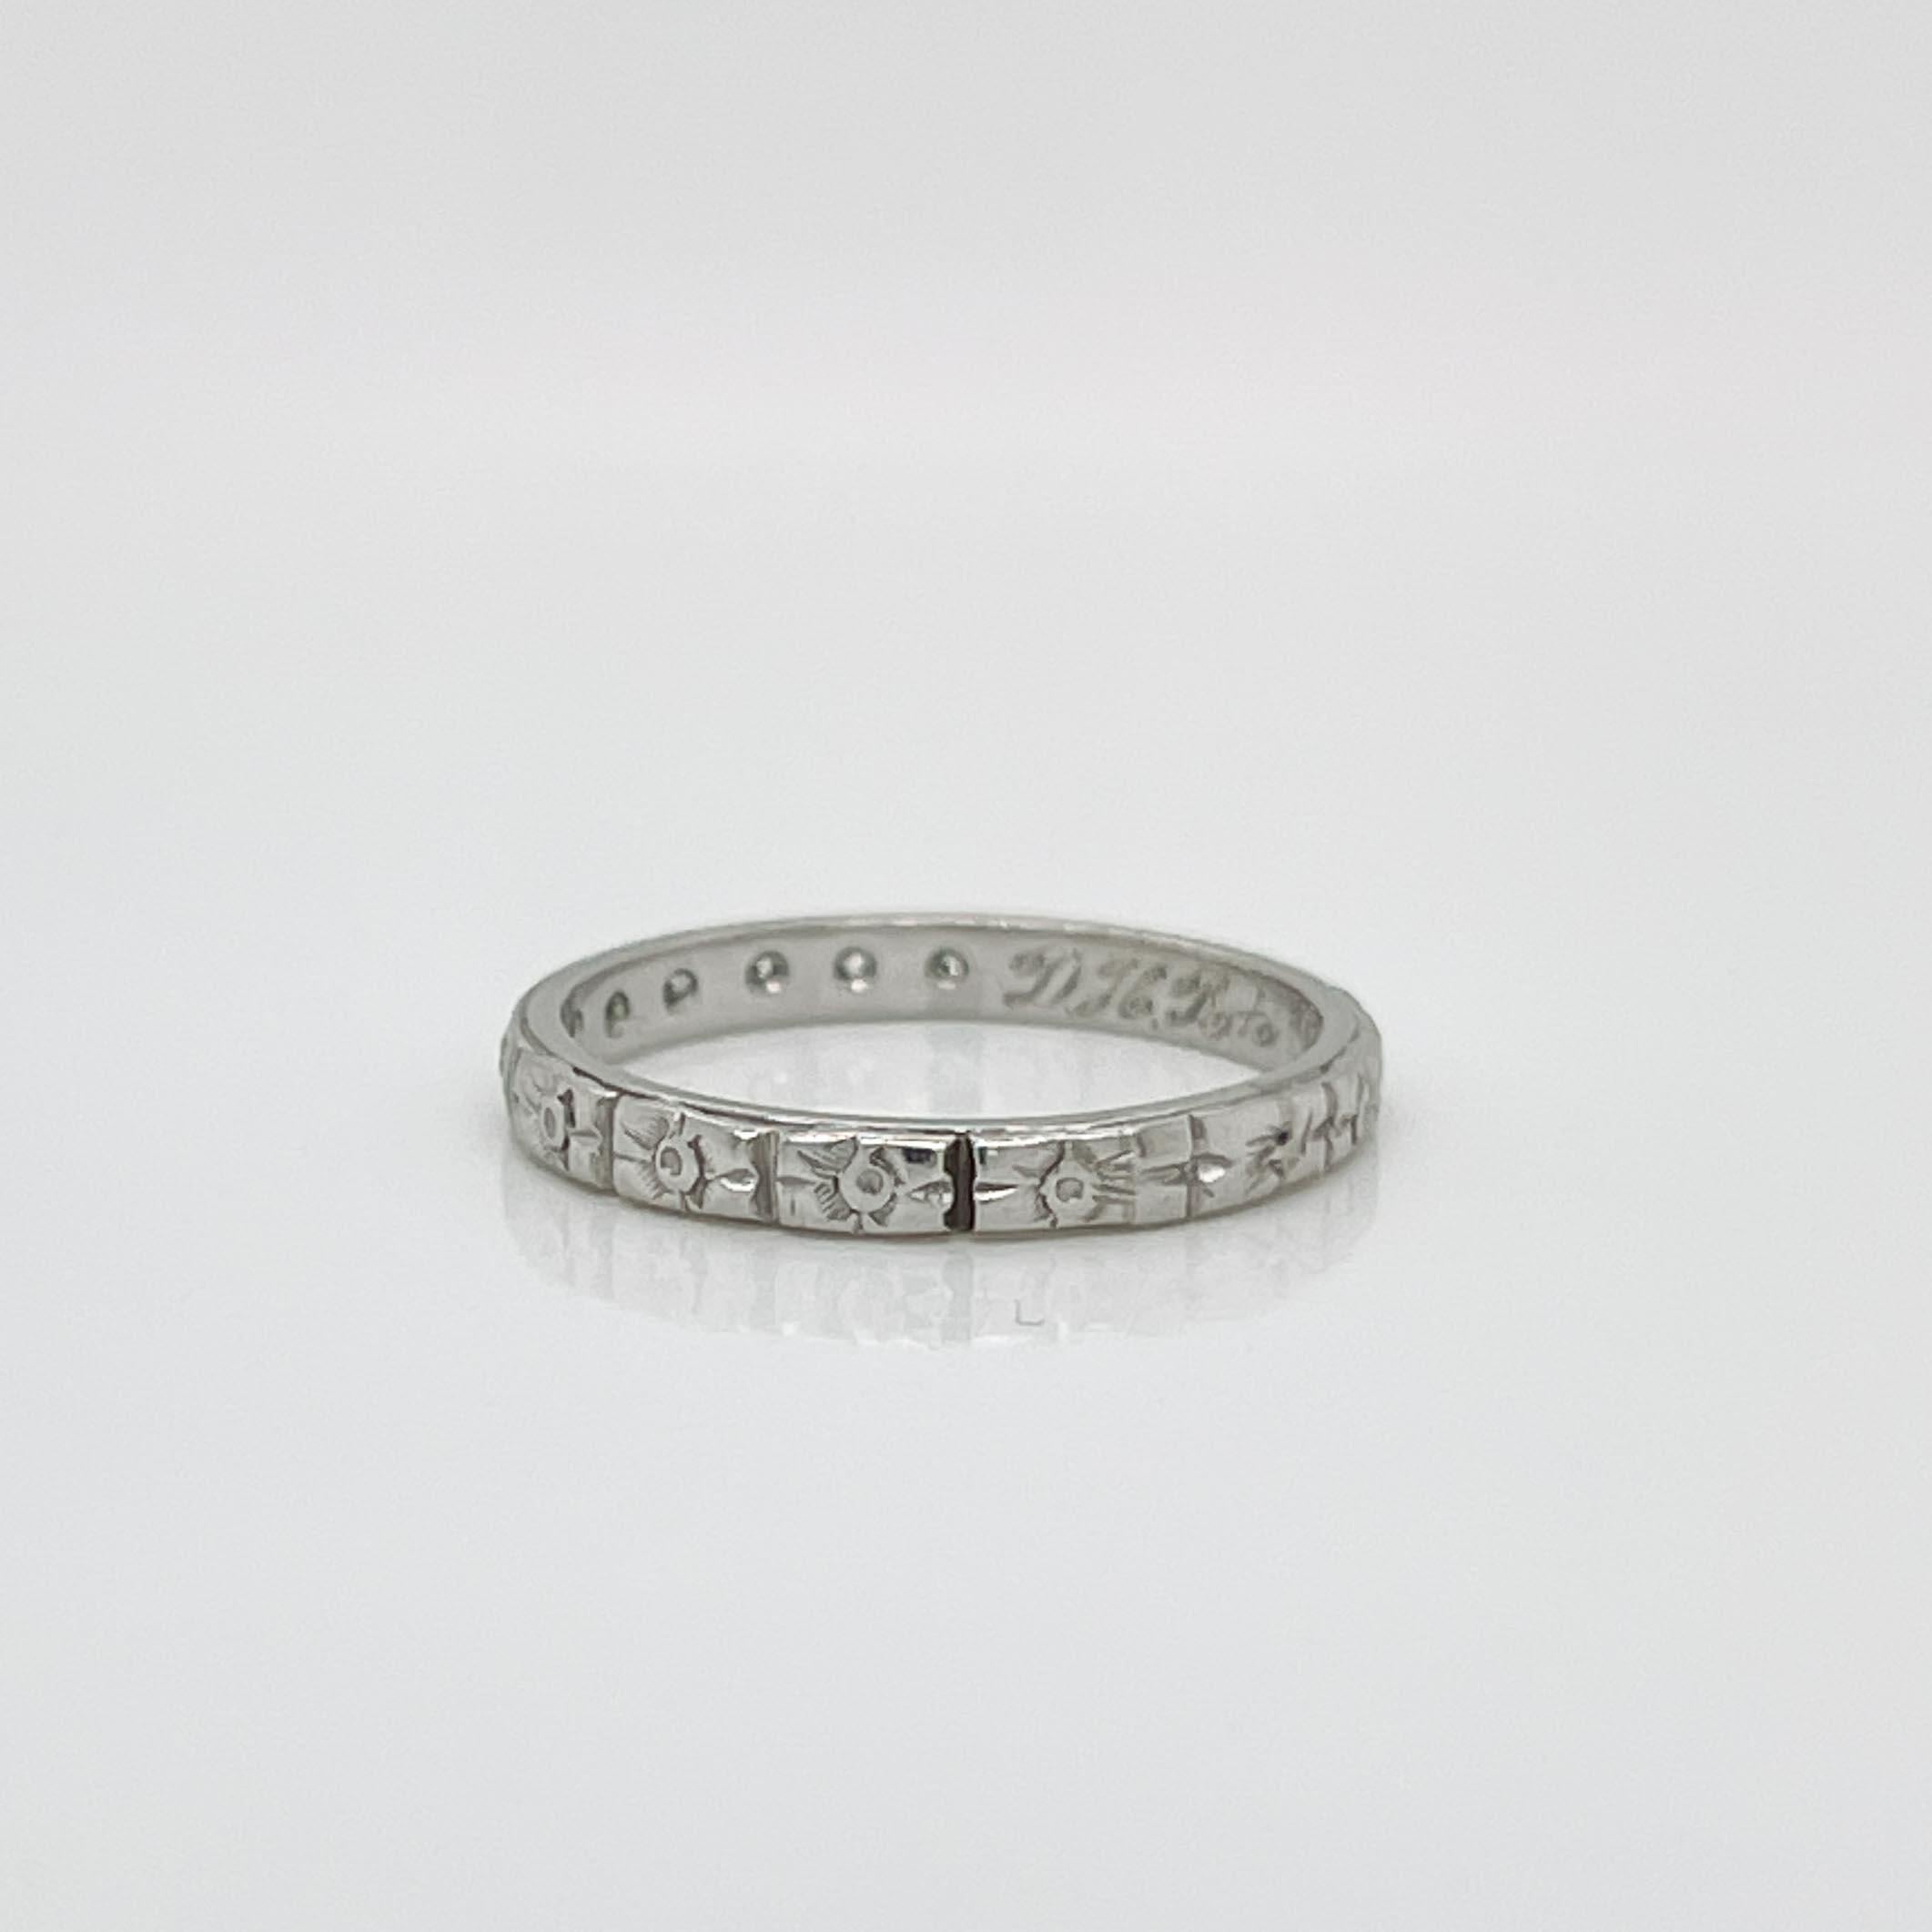 A fine Art Deco period band ring.

In platinum.

Prong set with 7 small round cut white diamonds and engraved with orange blossom decoration around the band.

Simply a wonderful period ring!

Date:
Early 20th Century

Overall Condition:
It is in